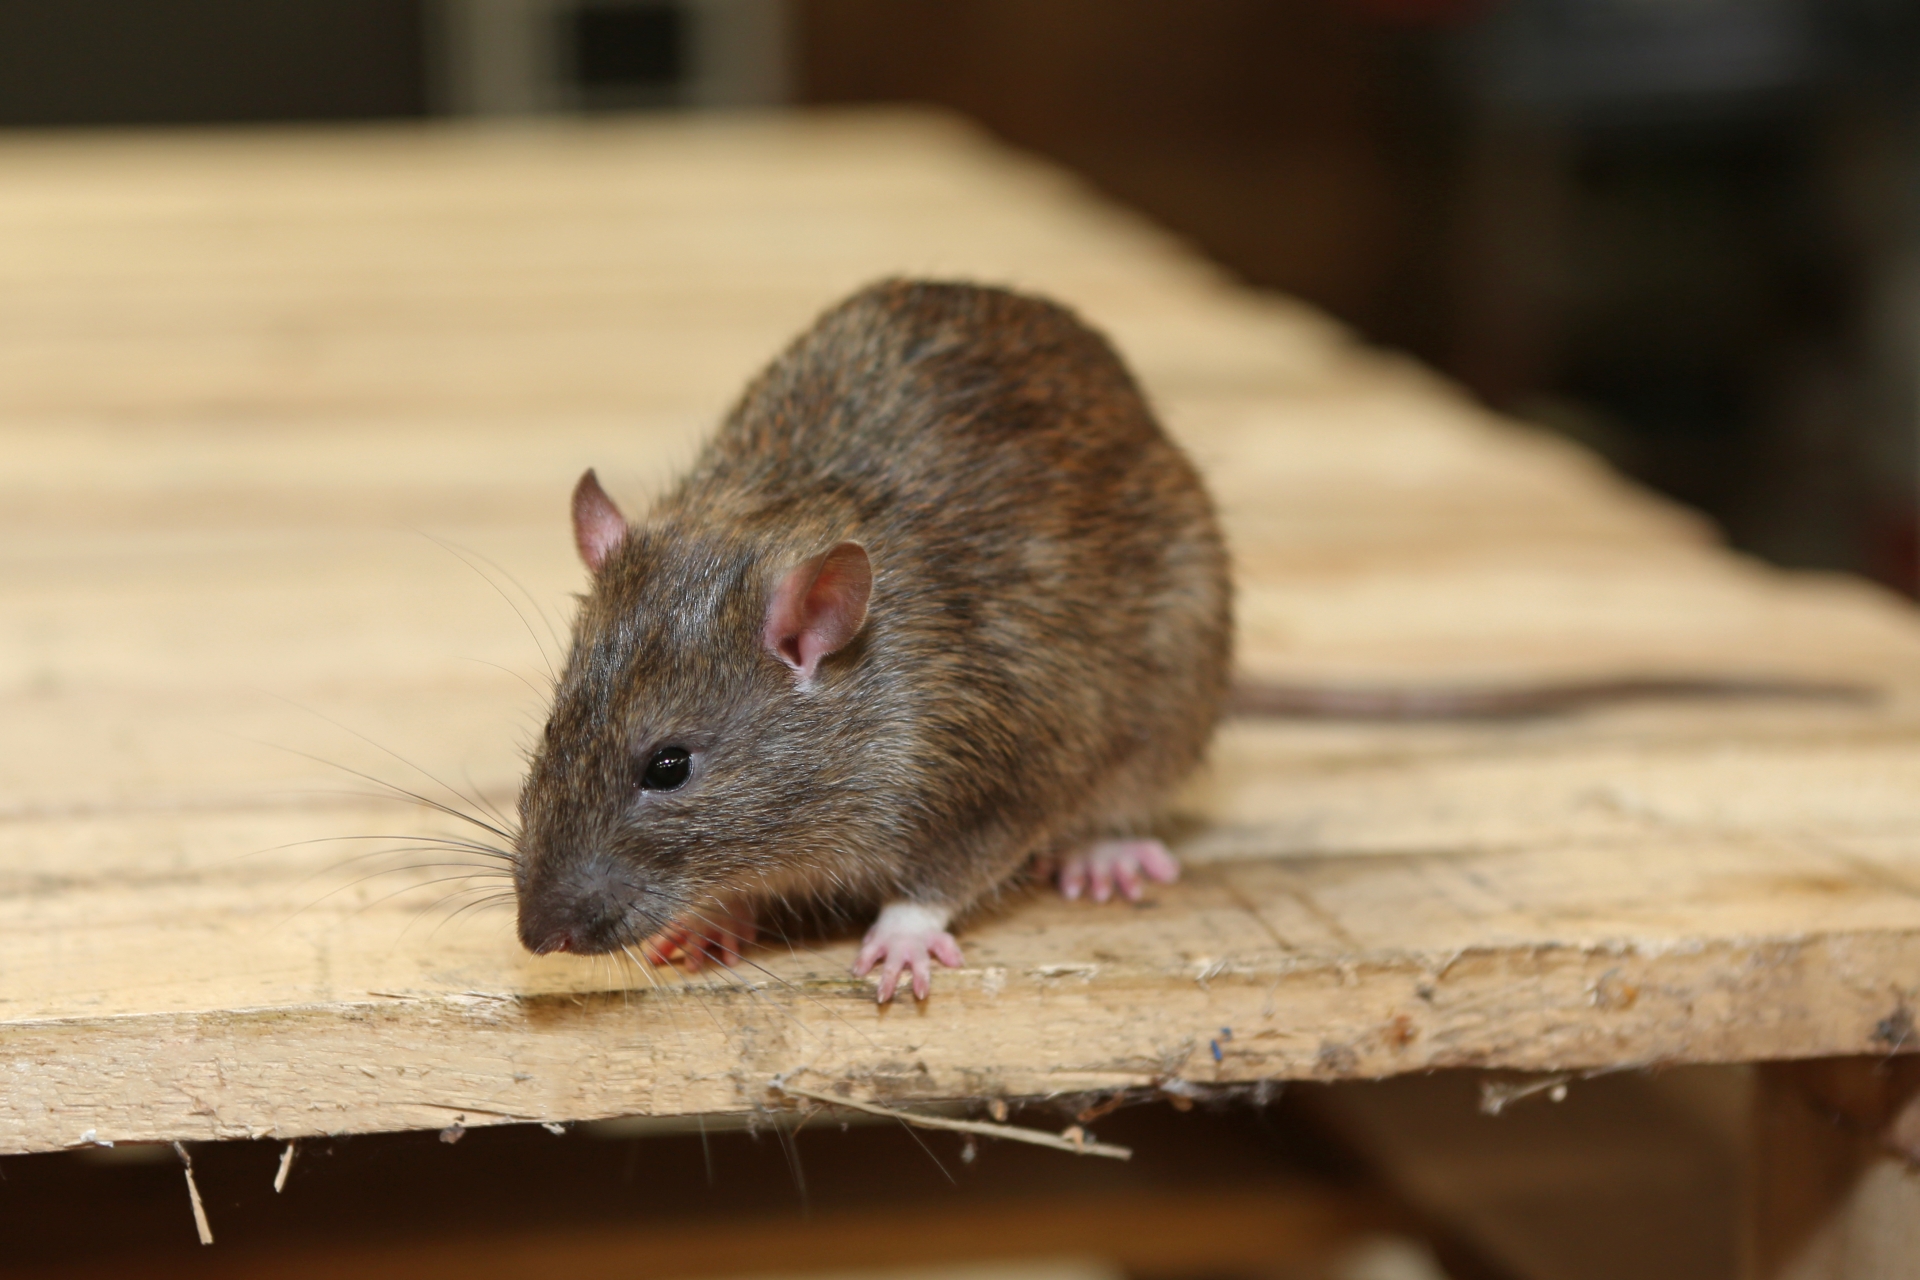 Rat Control, Pest Control in Battersea, SW11 . Call Now 020 8166 9746